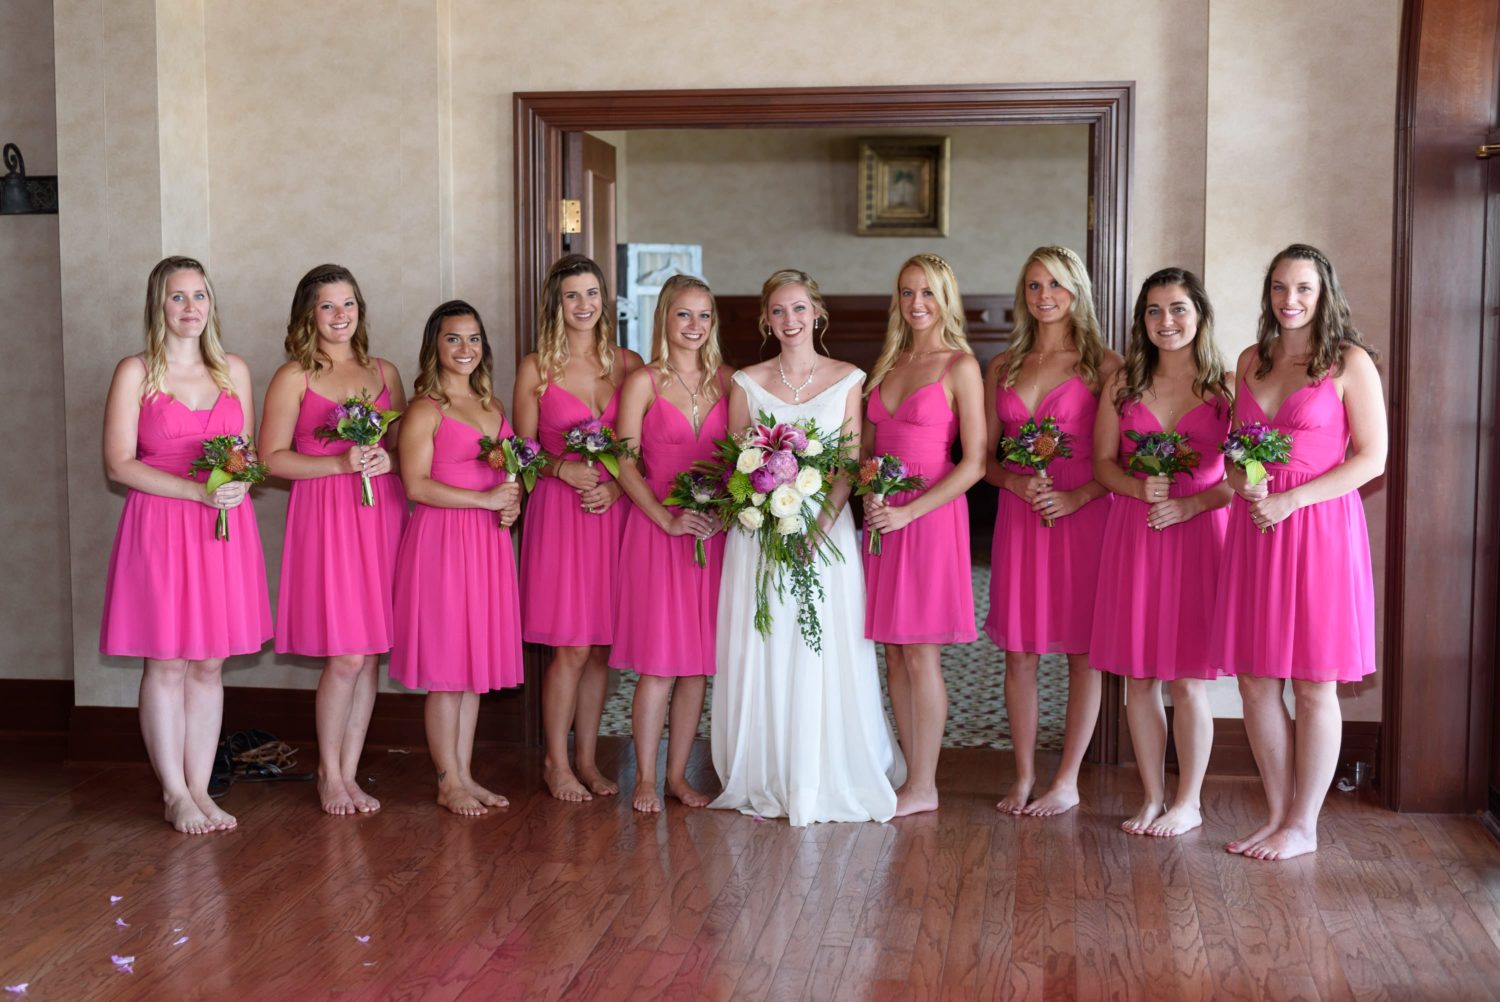 Bridesmaids standing together before the ceremony -  Grande Dunes Ocean Club